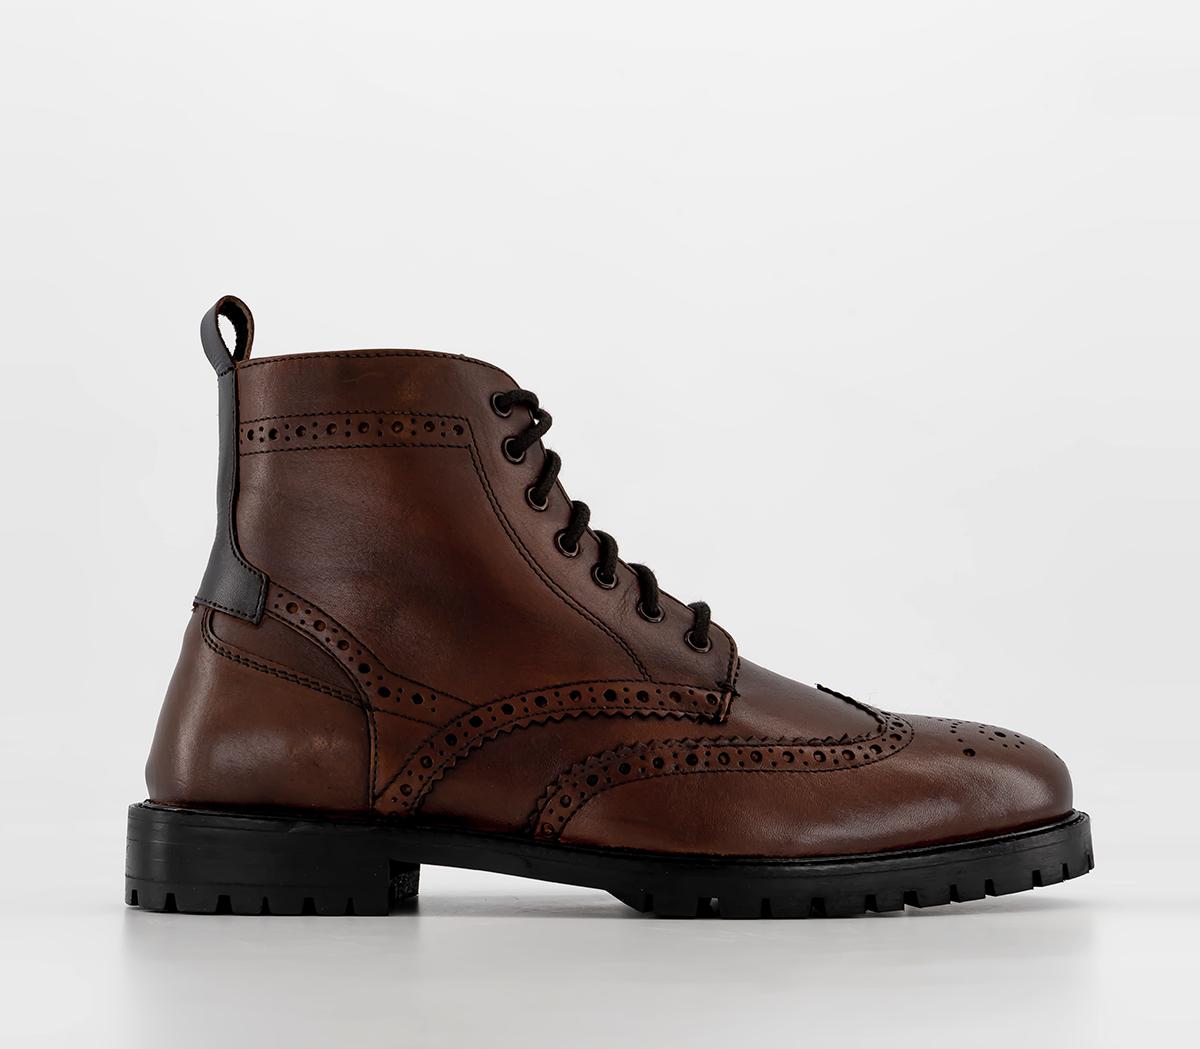 OFFICEBenson Brogue Wedge Lace BootsBrown Leather